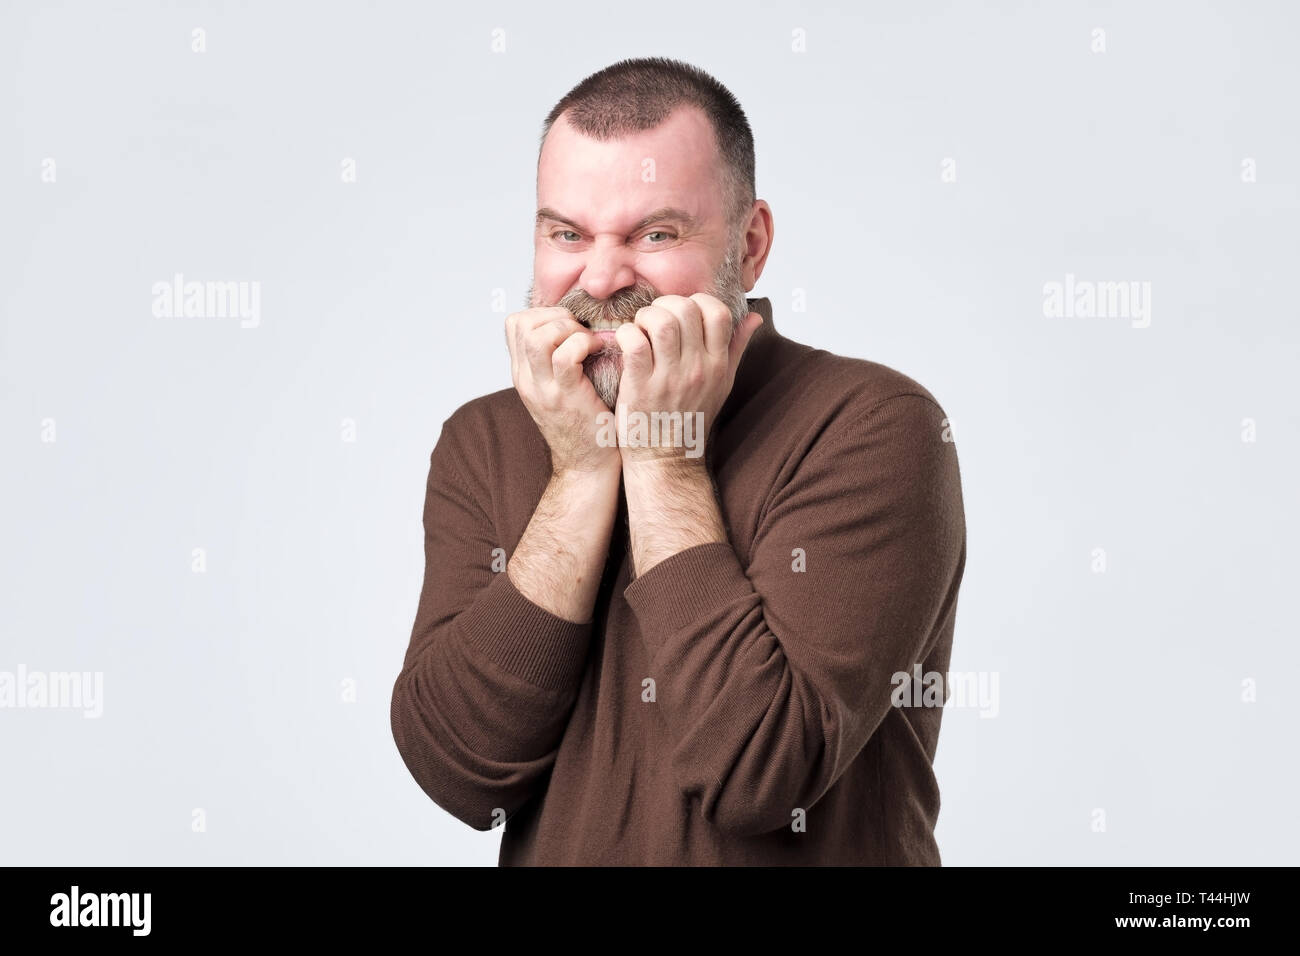 Man with beard in brown shirt biting nails in fear Stock Photo